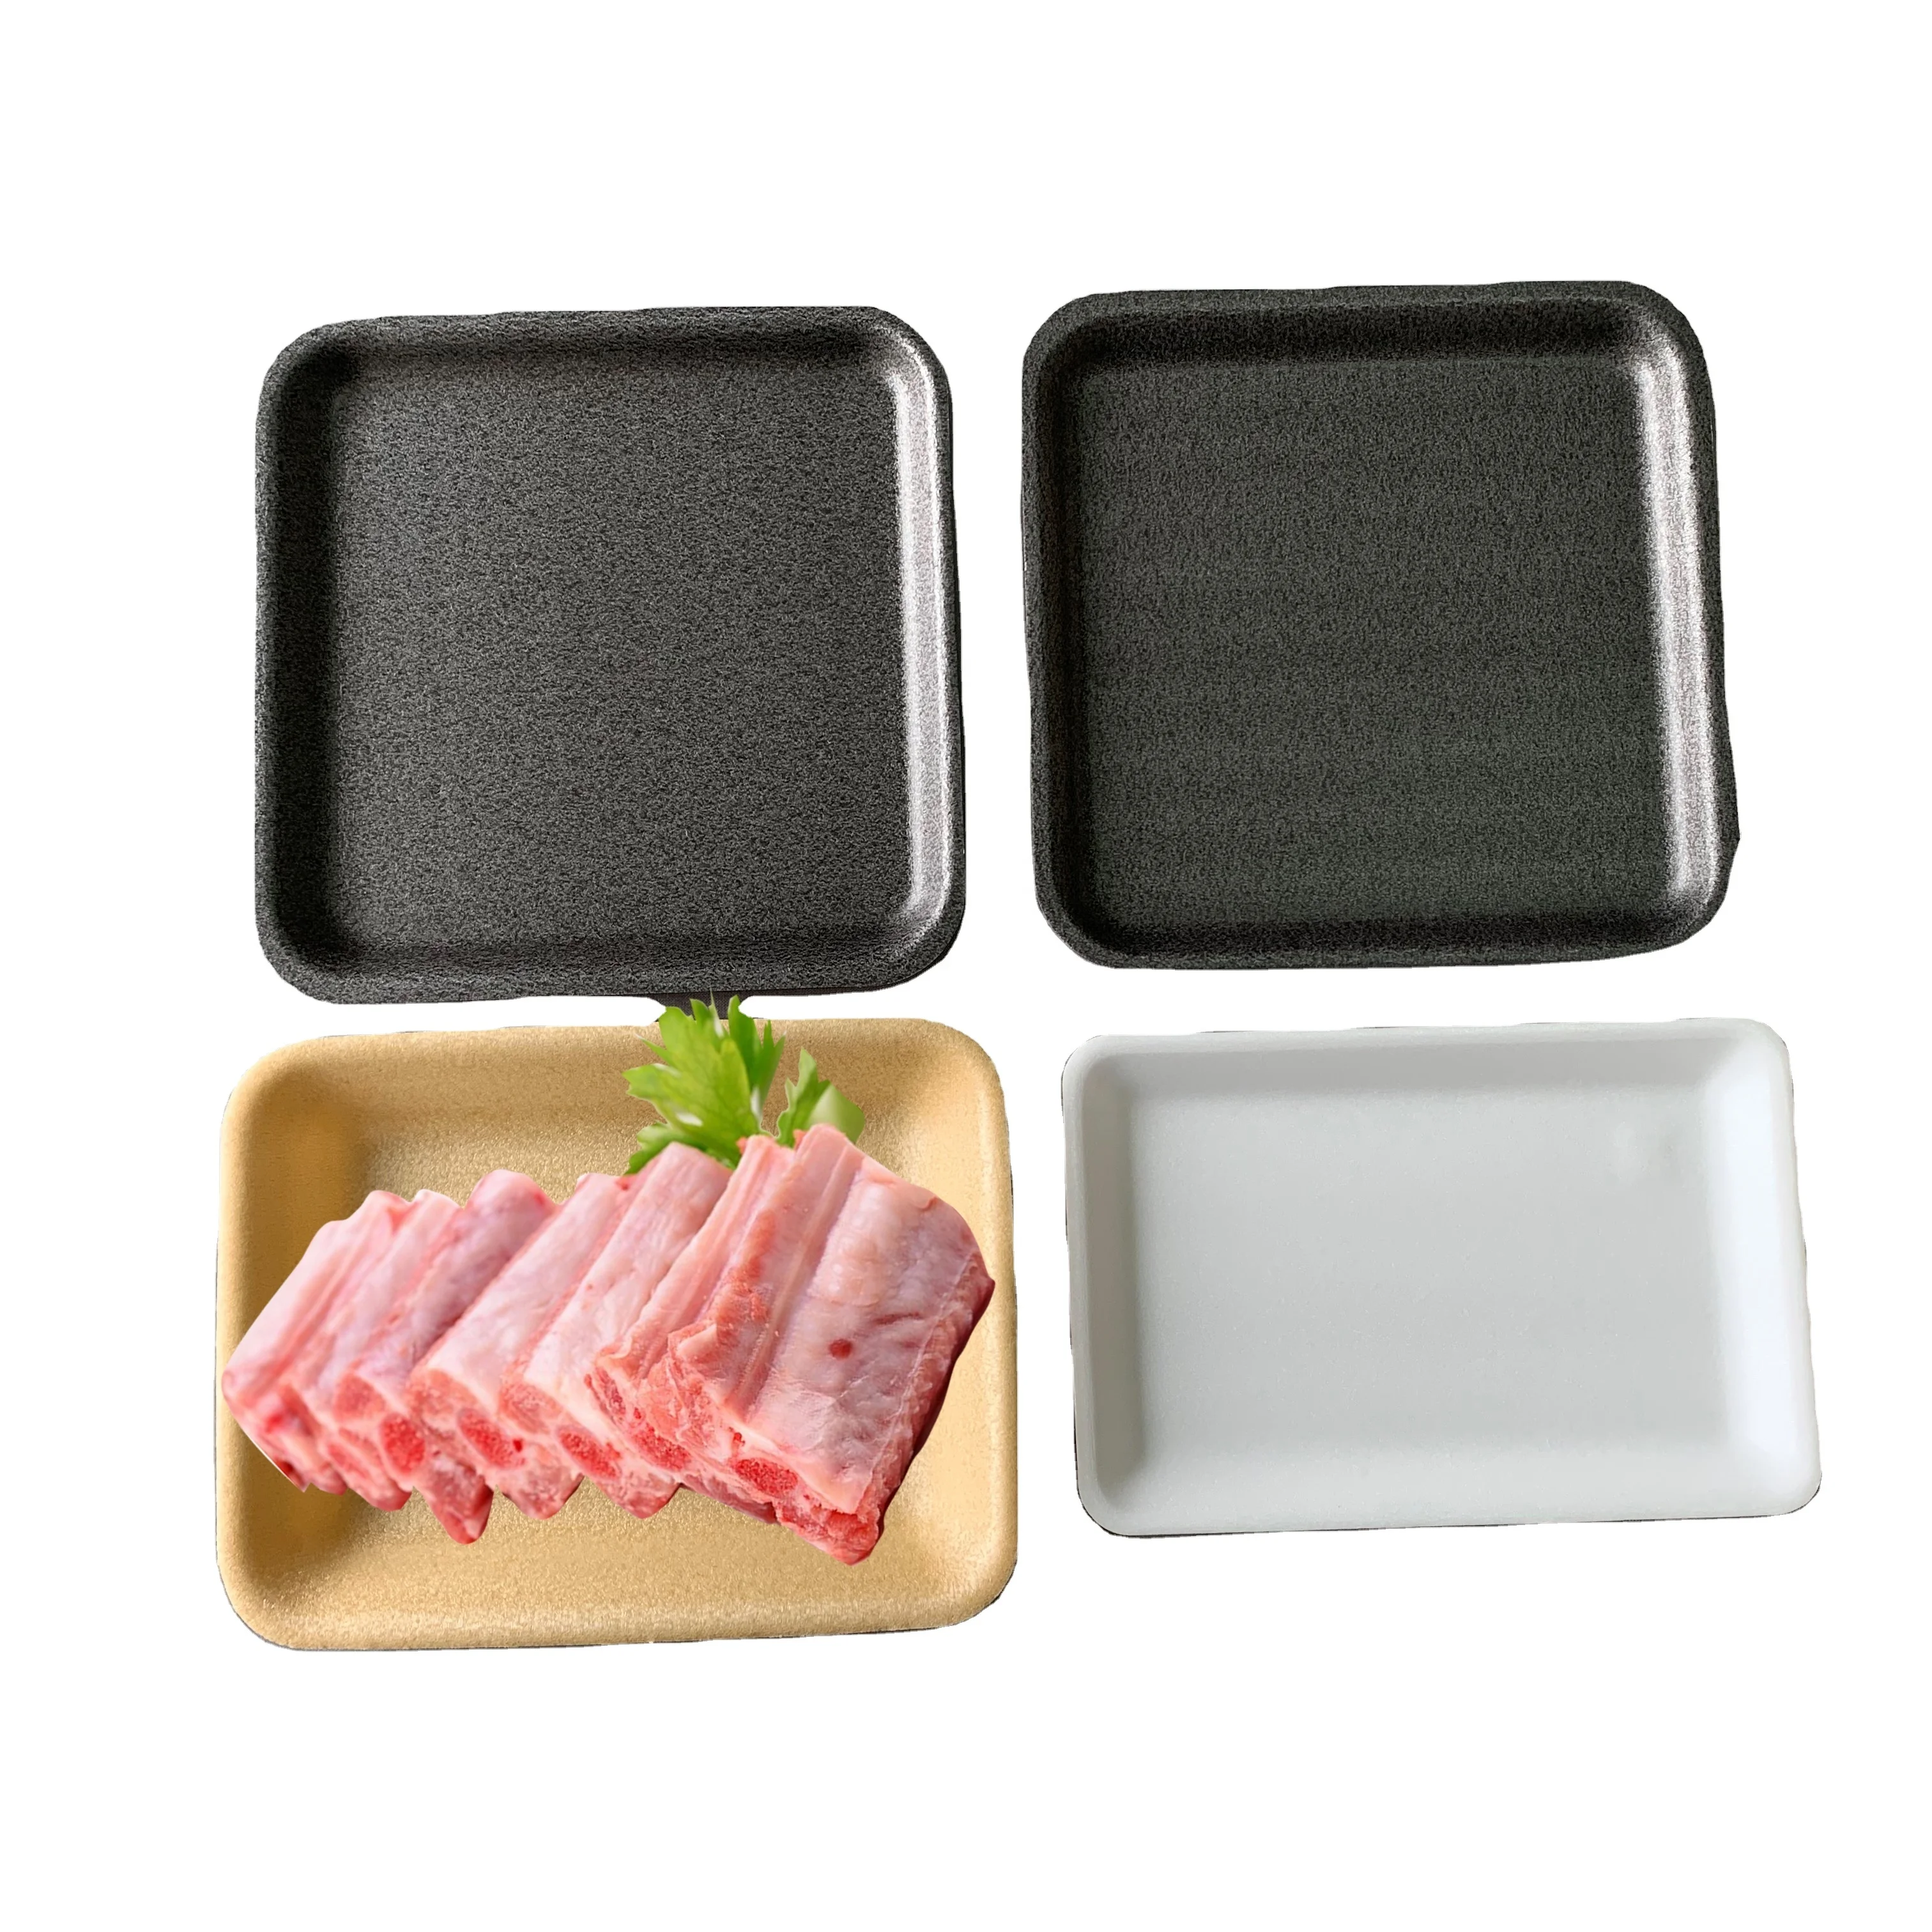 Polystyrene Foam Trays Set the Standard for Food Safety and